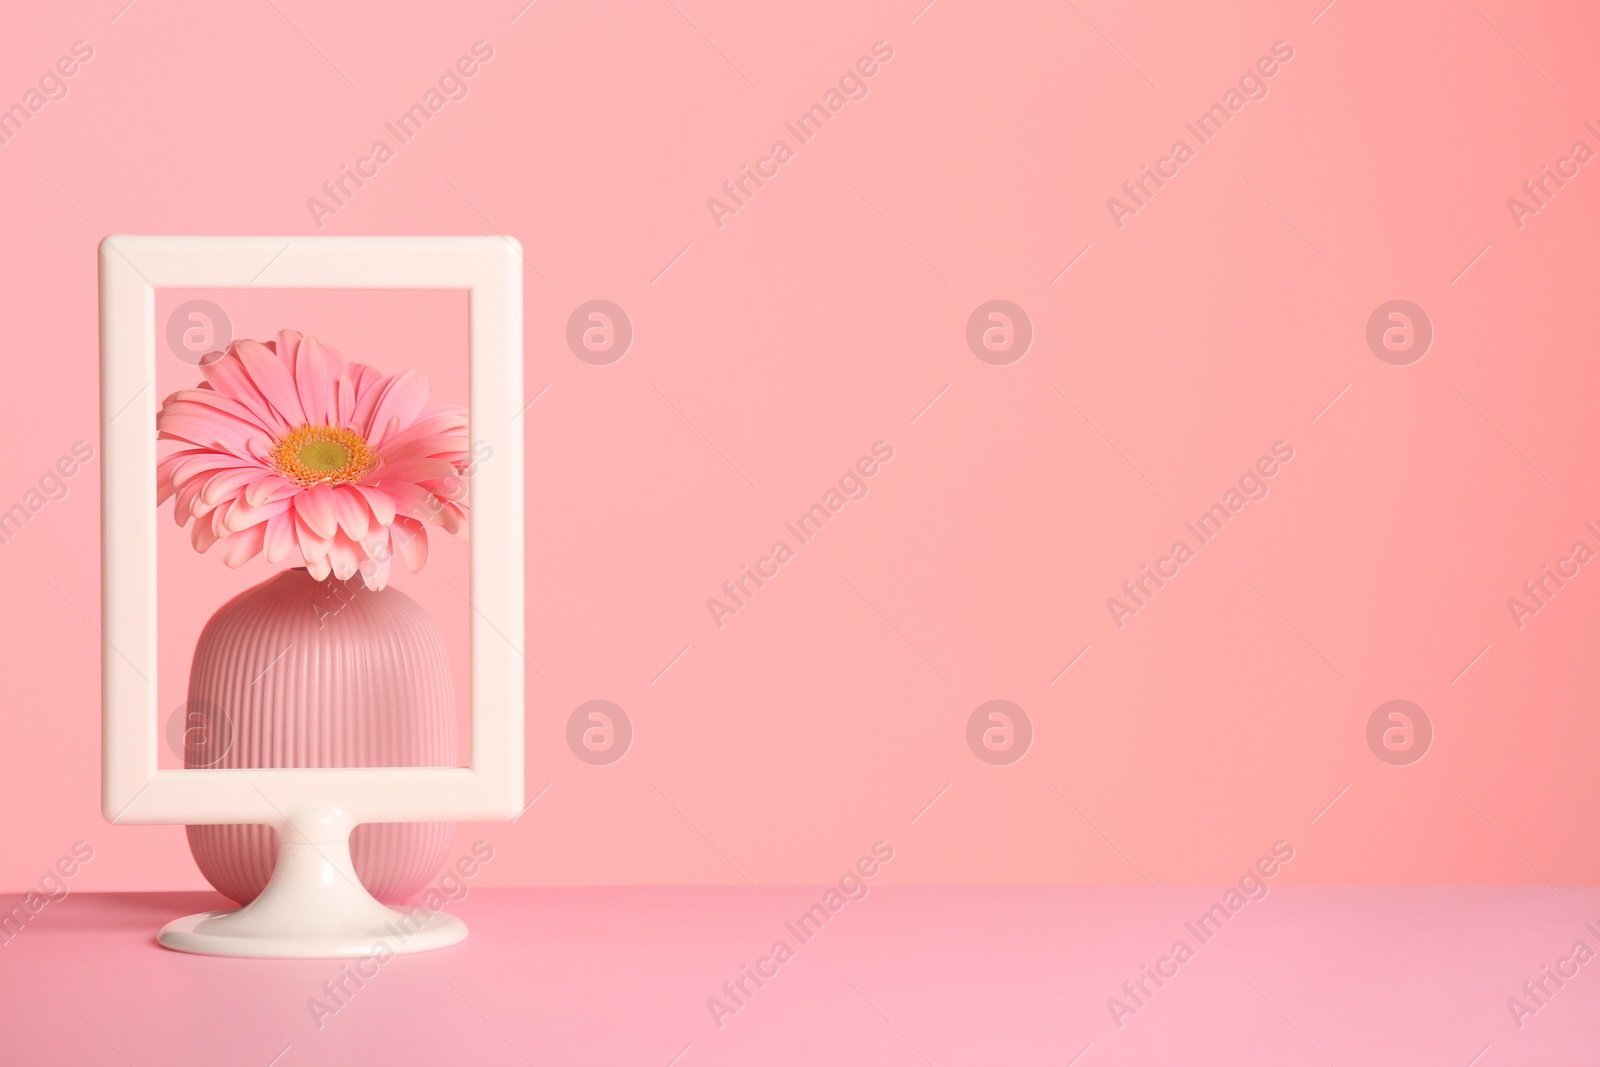 Photo of Vase with flower and photo frame on table against color background, space for text. International Women's Day